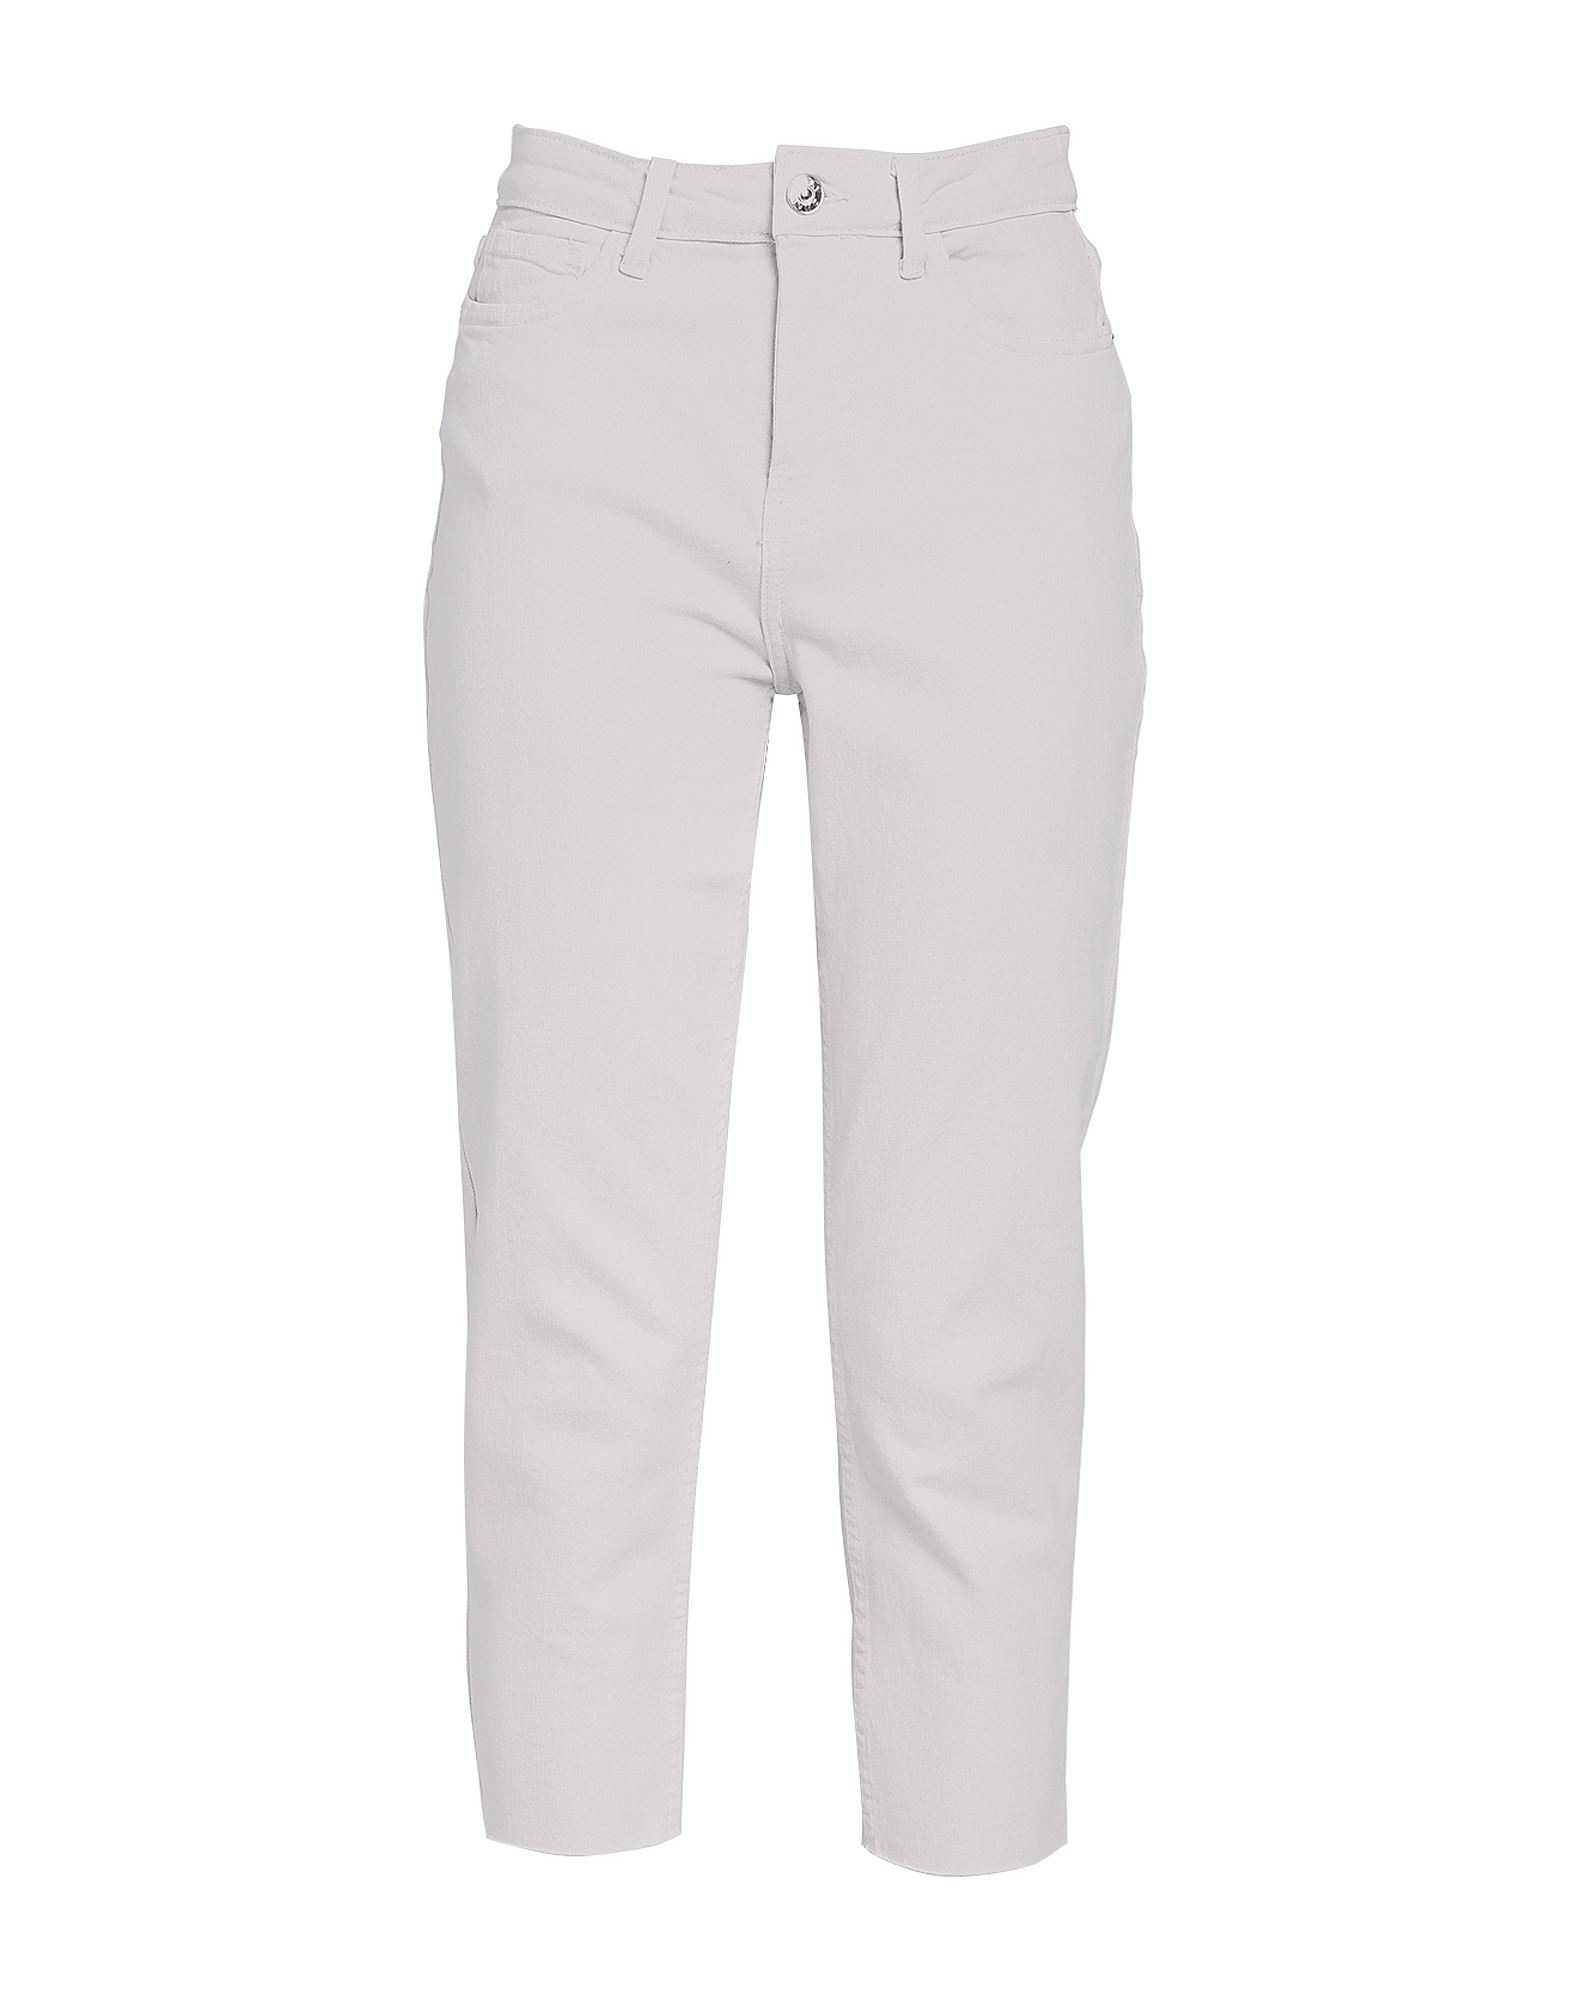 Only Woman Cropped Pants Cream Size 27w-30l Cotton, Elastane In White